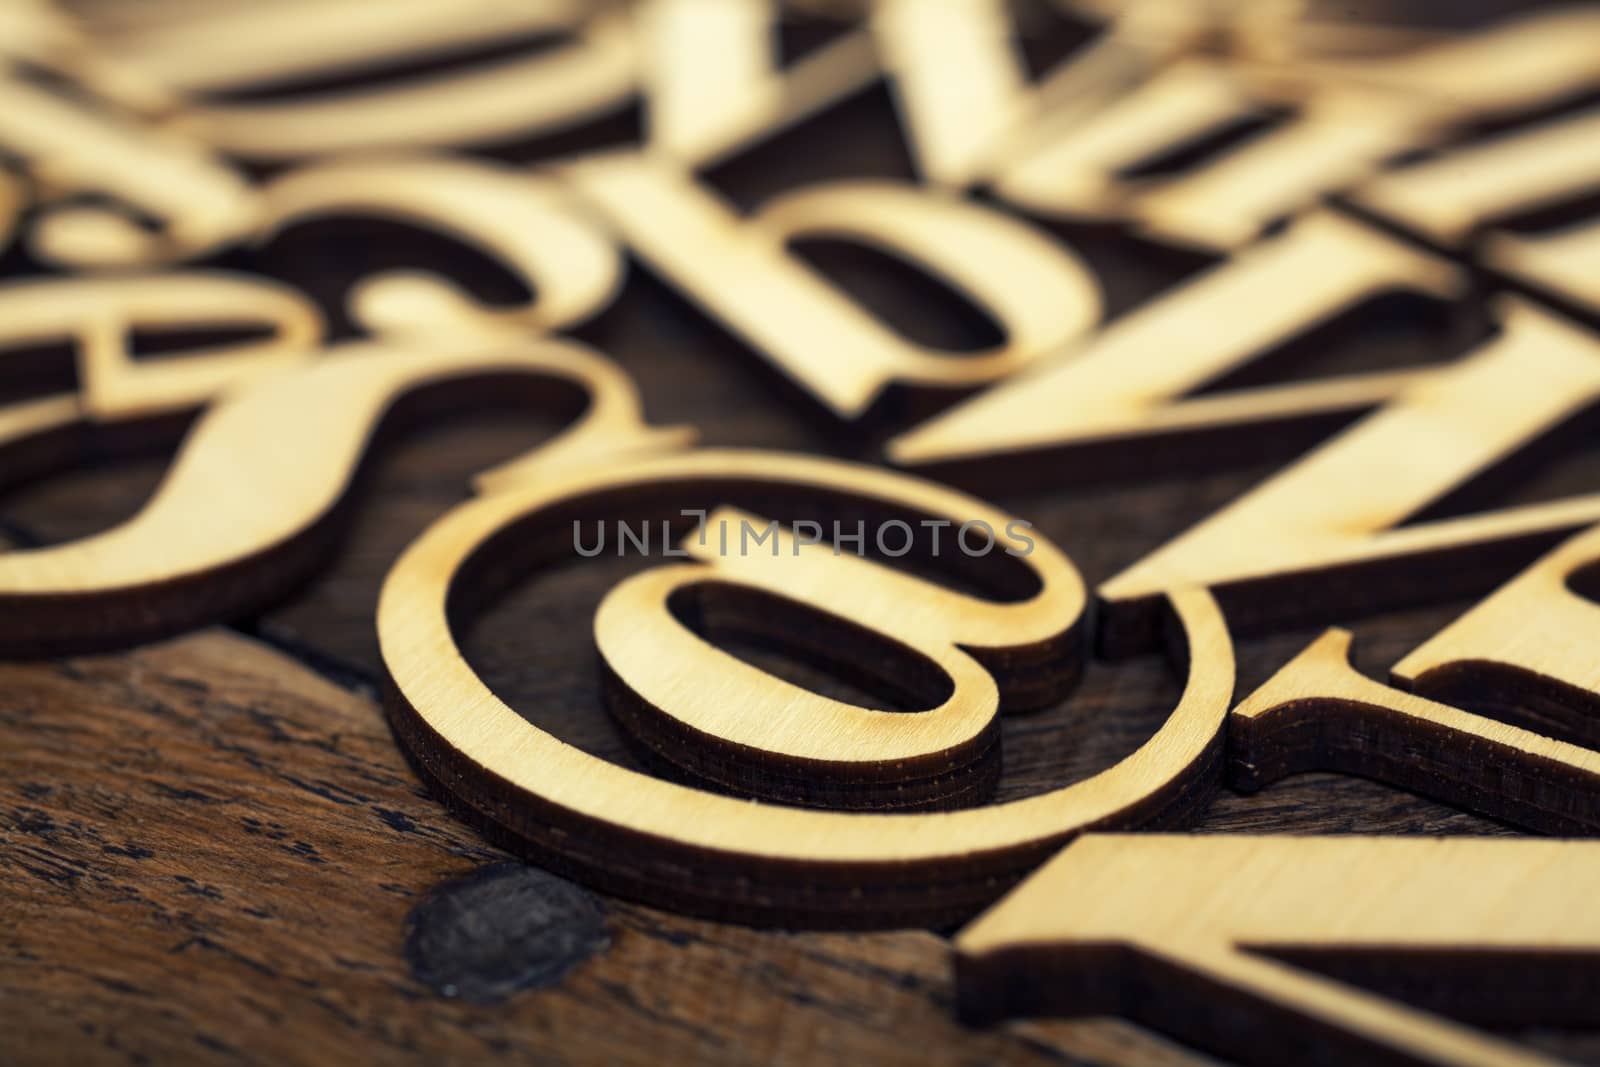 Wooden alphabet letters on old wooden surface